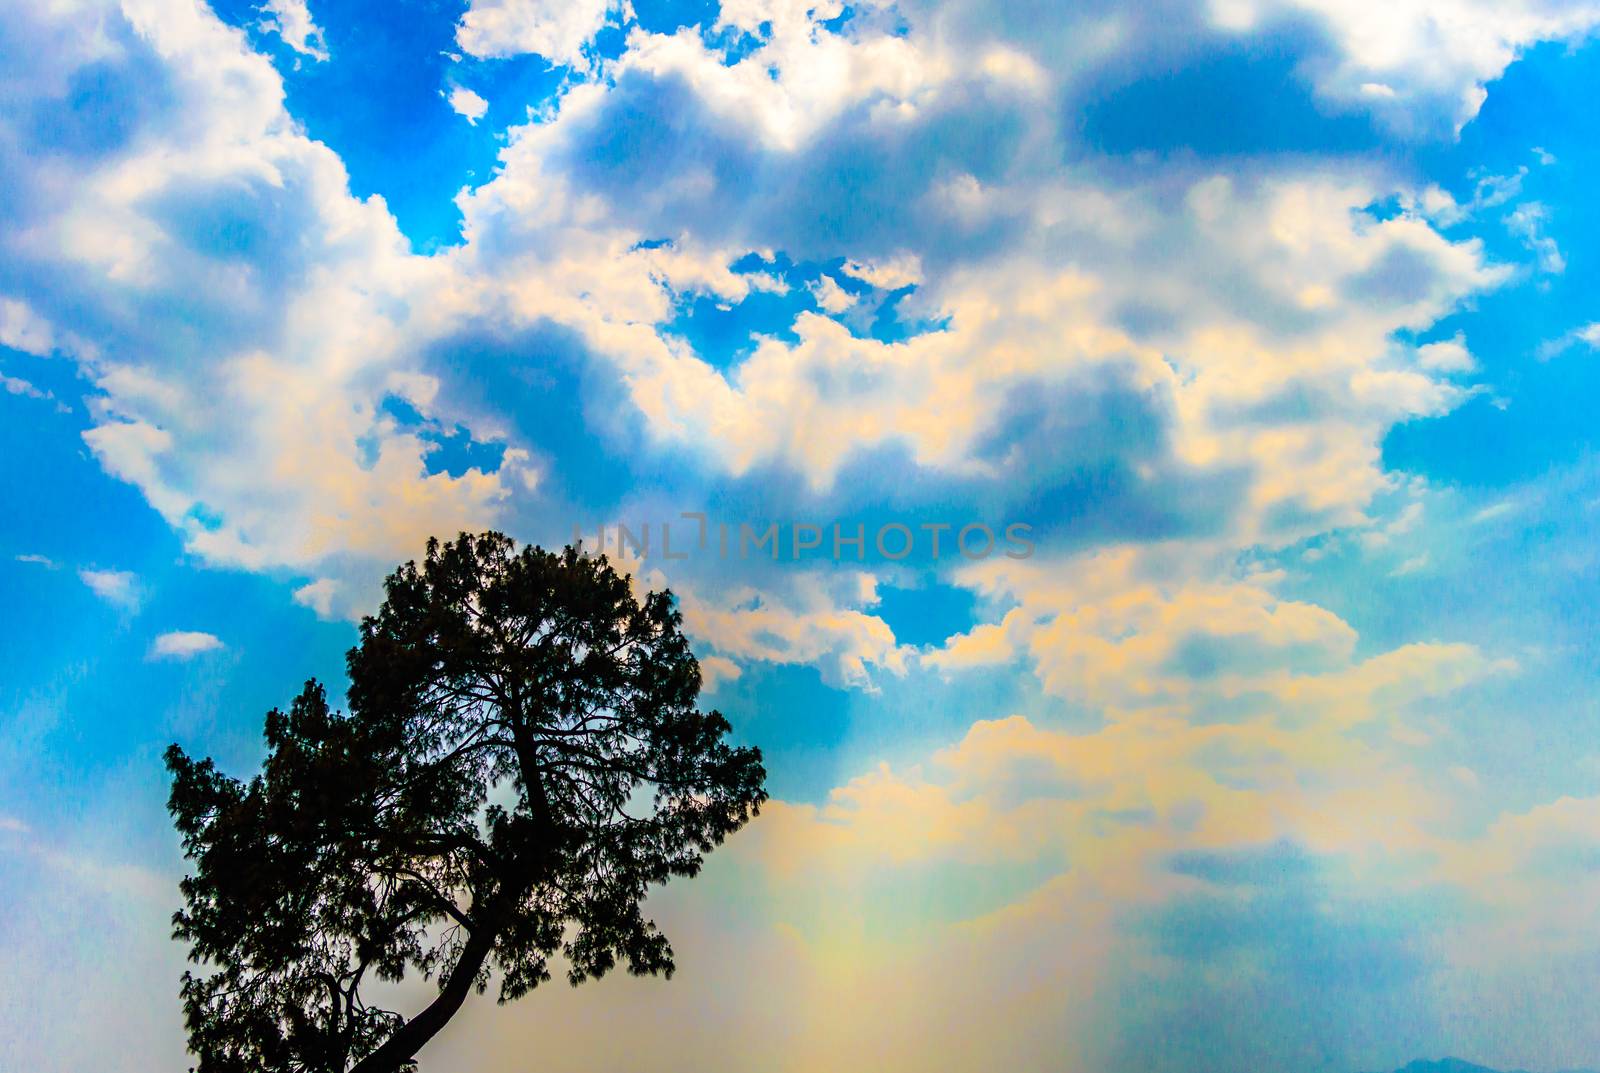 This is a photograph of silhouette Tree top against blue cloudy sky on a clouded sunny day during sunset in the evening time of a hill station of popular tourist destination. The image taken at dusk, at dawn, at daytime on a cloudy day. The Subject of the image is inspiration, exciting, hopeful, bright, sensational, tranquil, calm, stormy and stunning. This photography is taken in as landscape style. This photograph may be used as a background, wallpaper and screen saver.